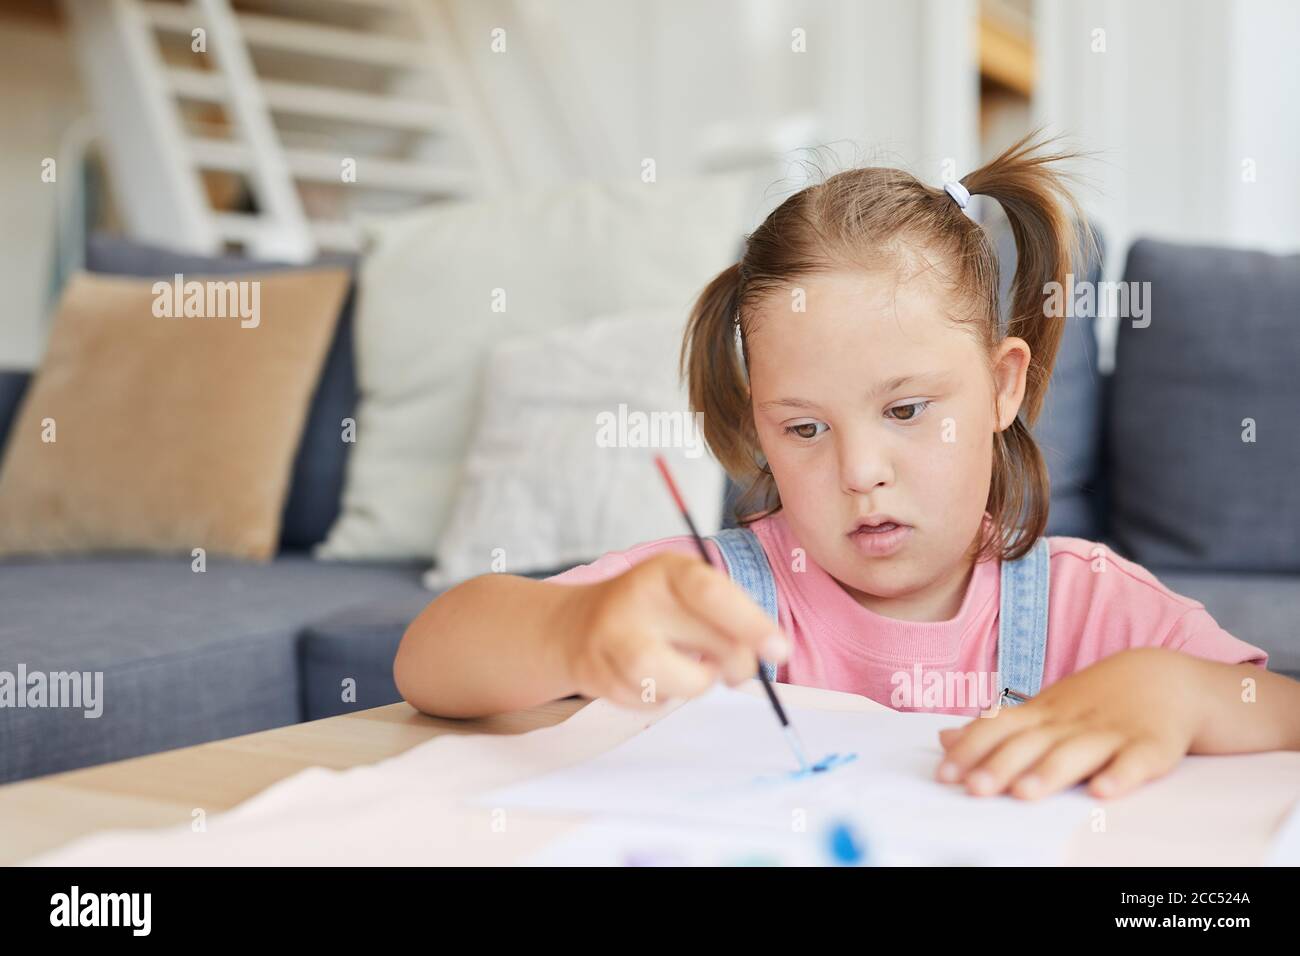 Little girl with down syndrome learning to paint with paints at the table at home Stock Photo